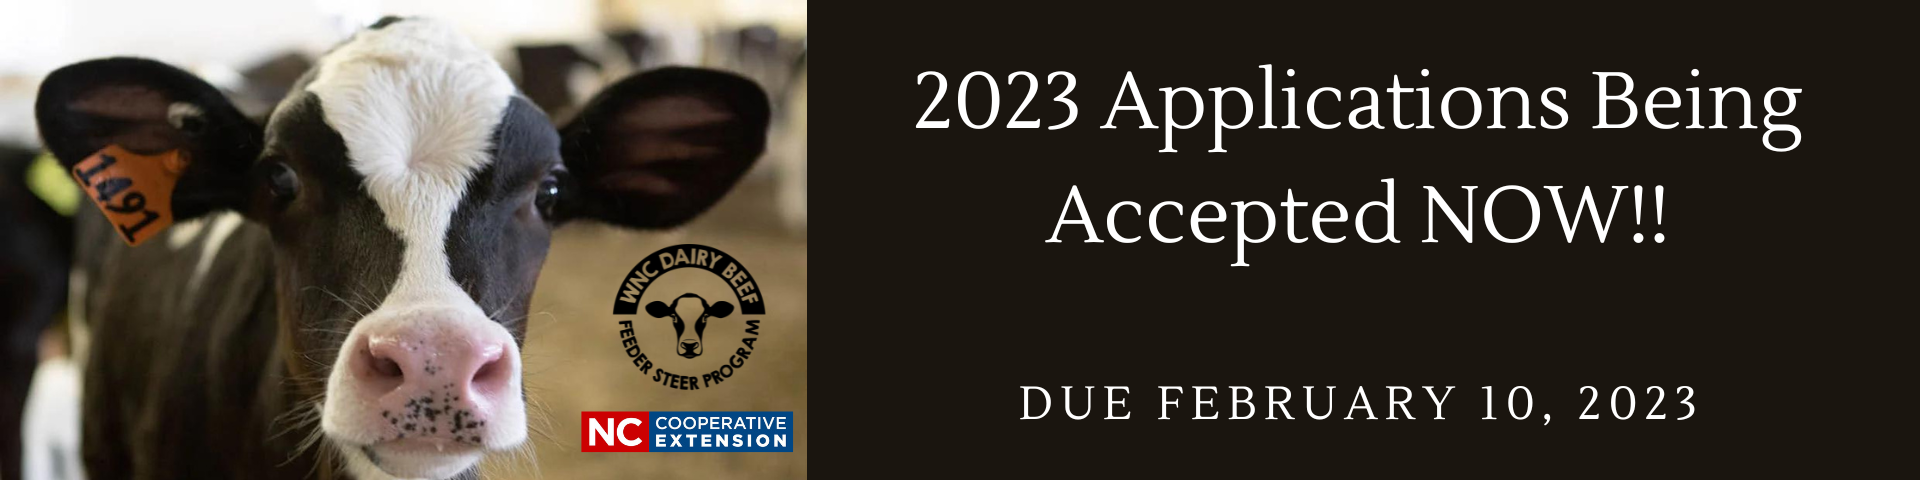 2023 Applications being accepted now! Due February 10, 2023